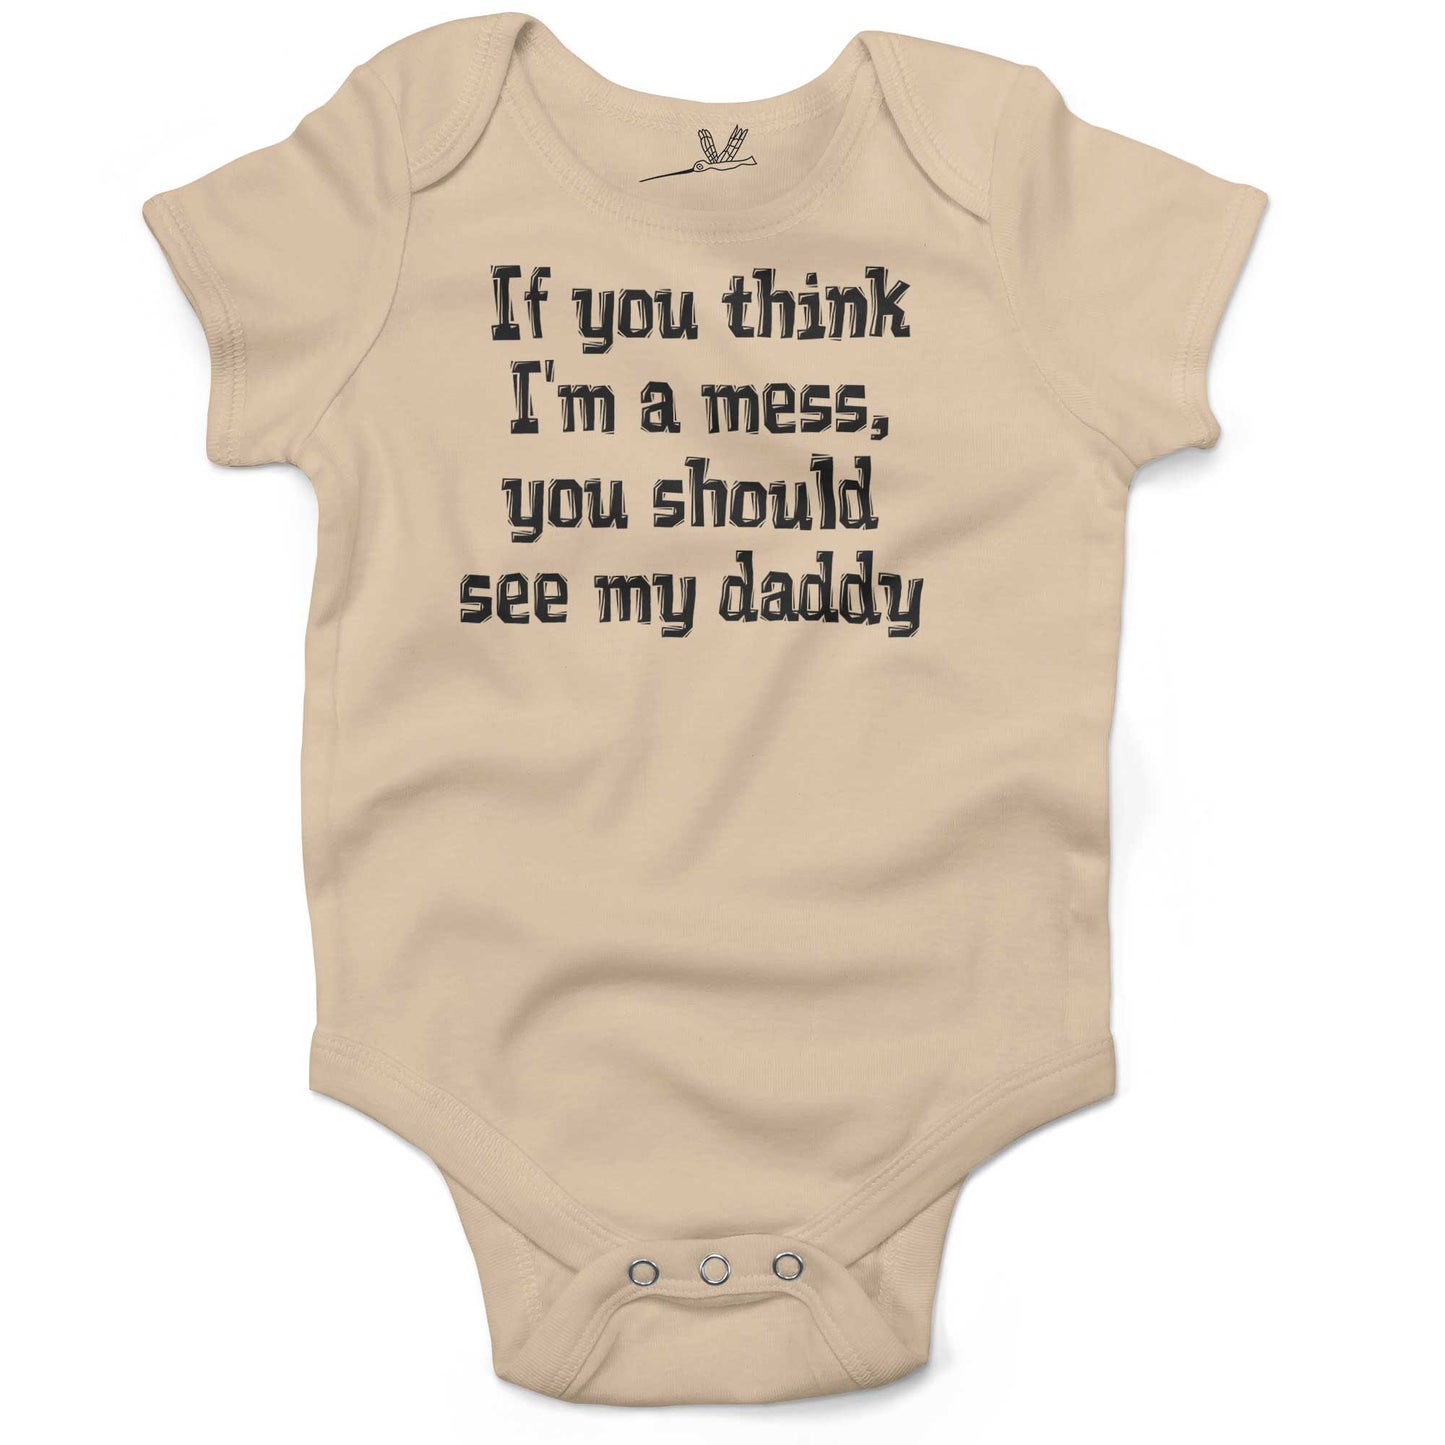 If You Think I'm A Mess, You Should See My Daddy Infant Bodysuit or Raglan Tee-Organic Natural-3-6 months